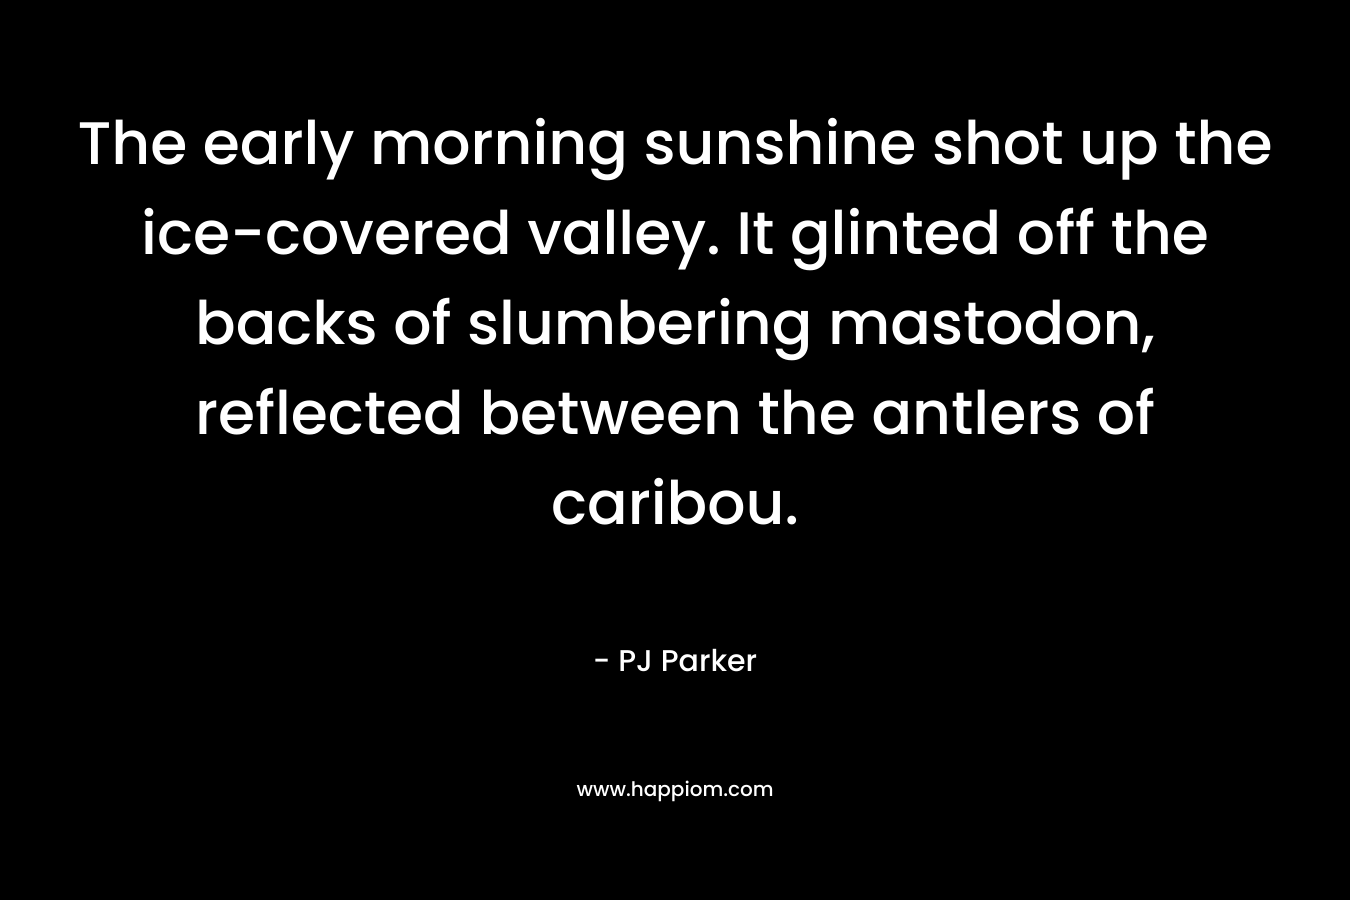 The early morning sunshine shot up the ice-covered valley. It glinted off the backs of slumbering mastodon, reflected between the antlers of caribou. – PJ Parker